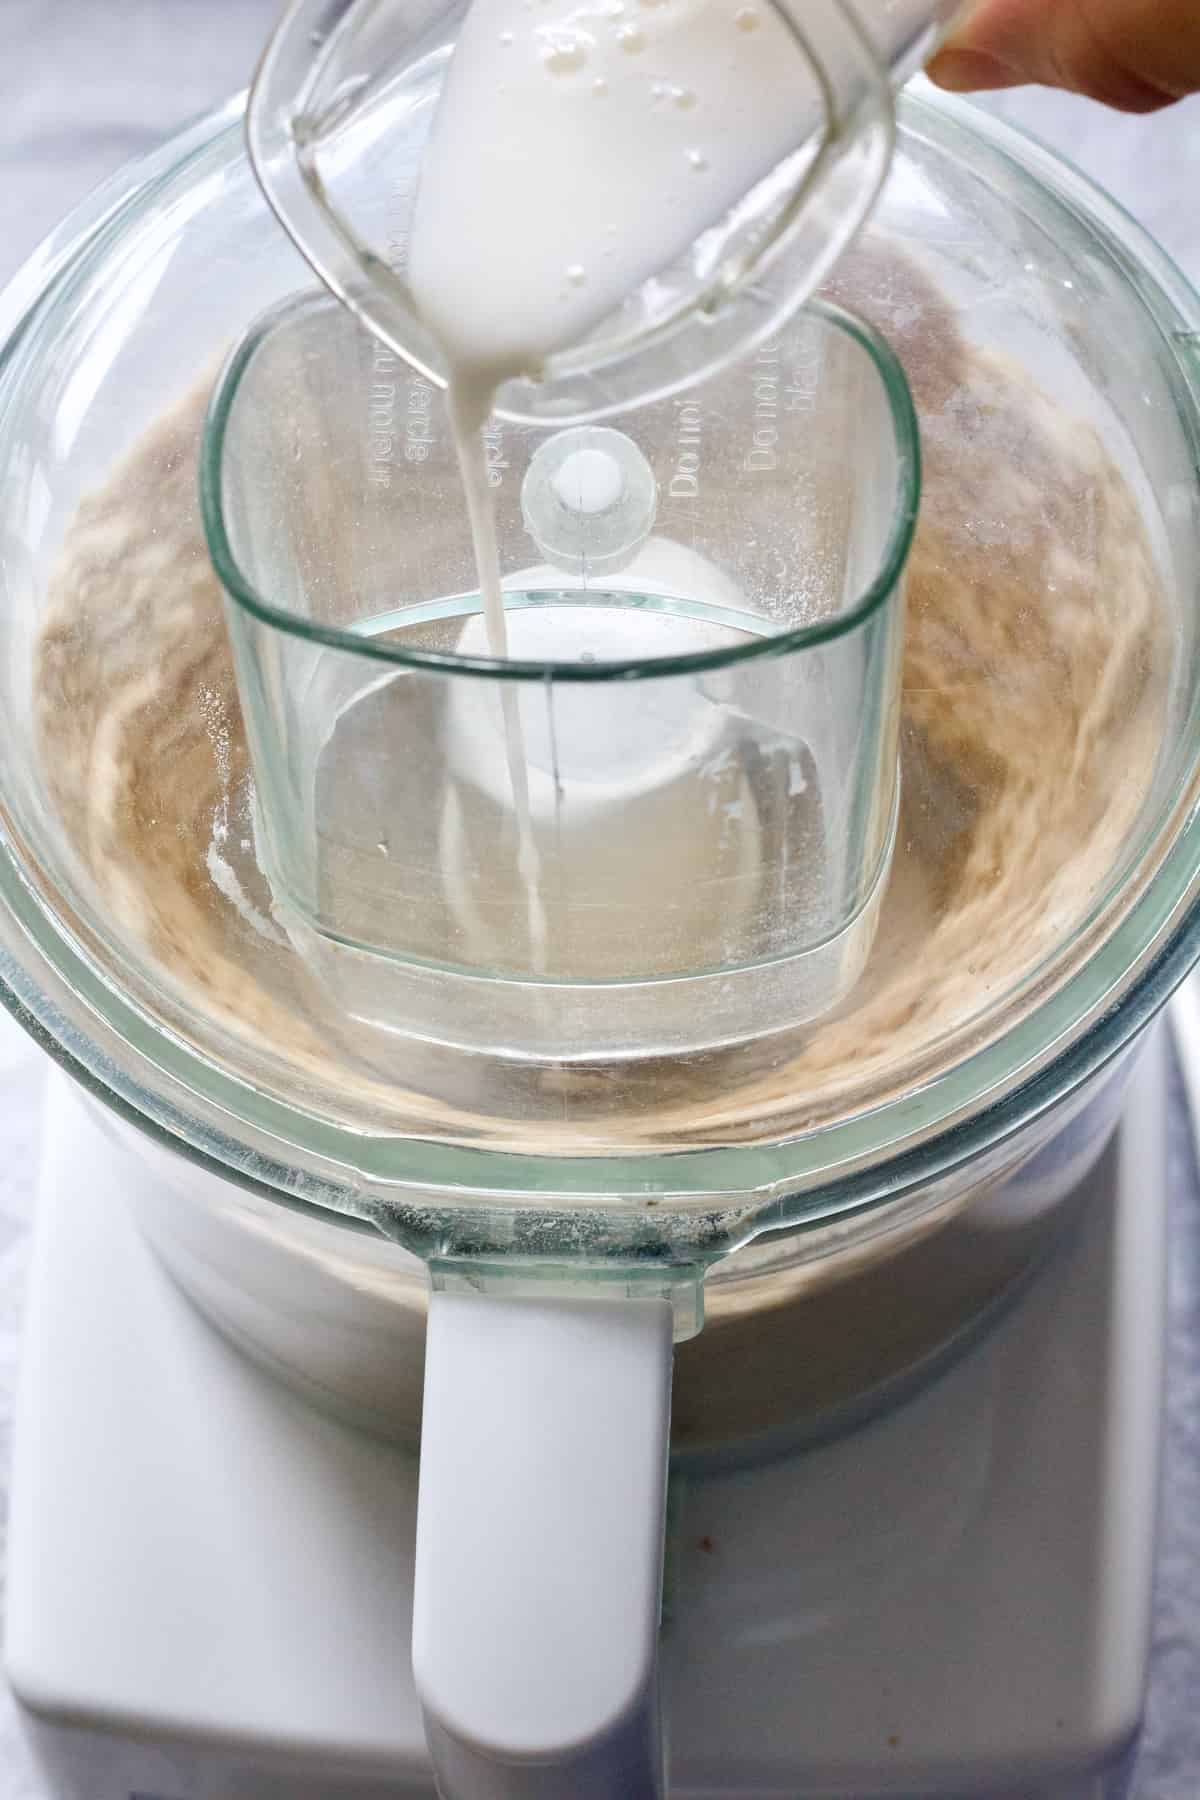 Milk being poured into food processor to bind the pastry.